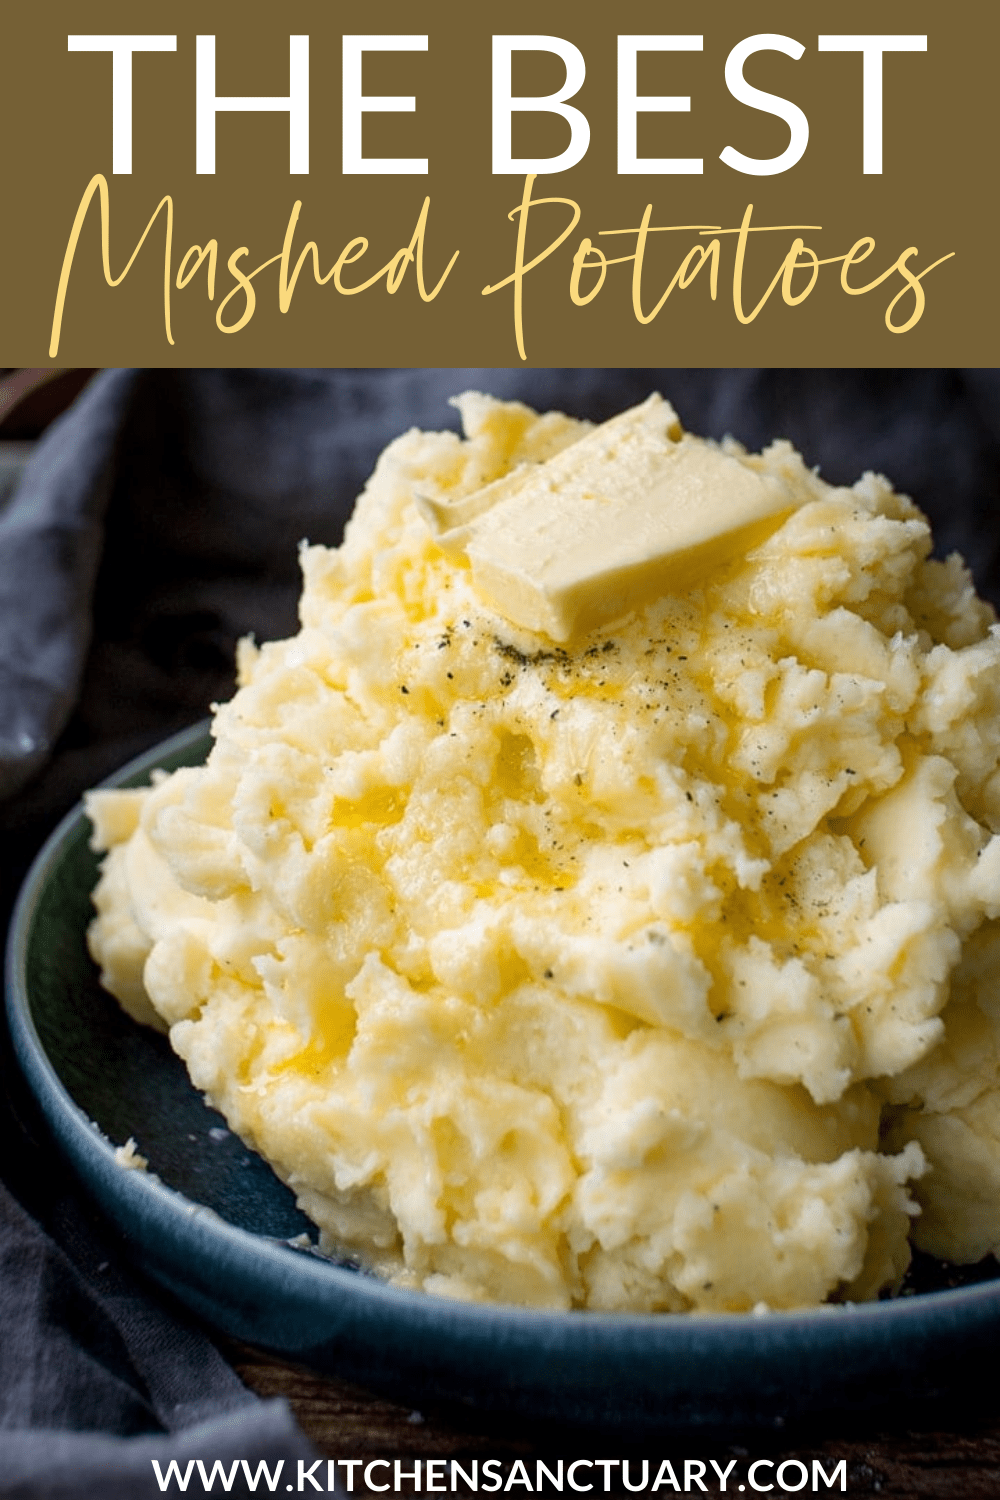 The Best Mashed Potatoes - Nicky's Kitchen Sanctuary